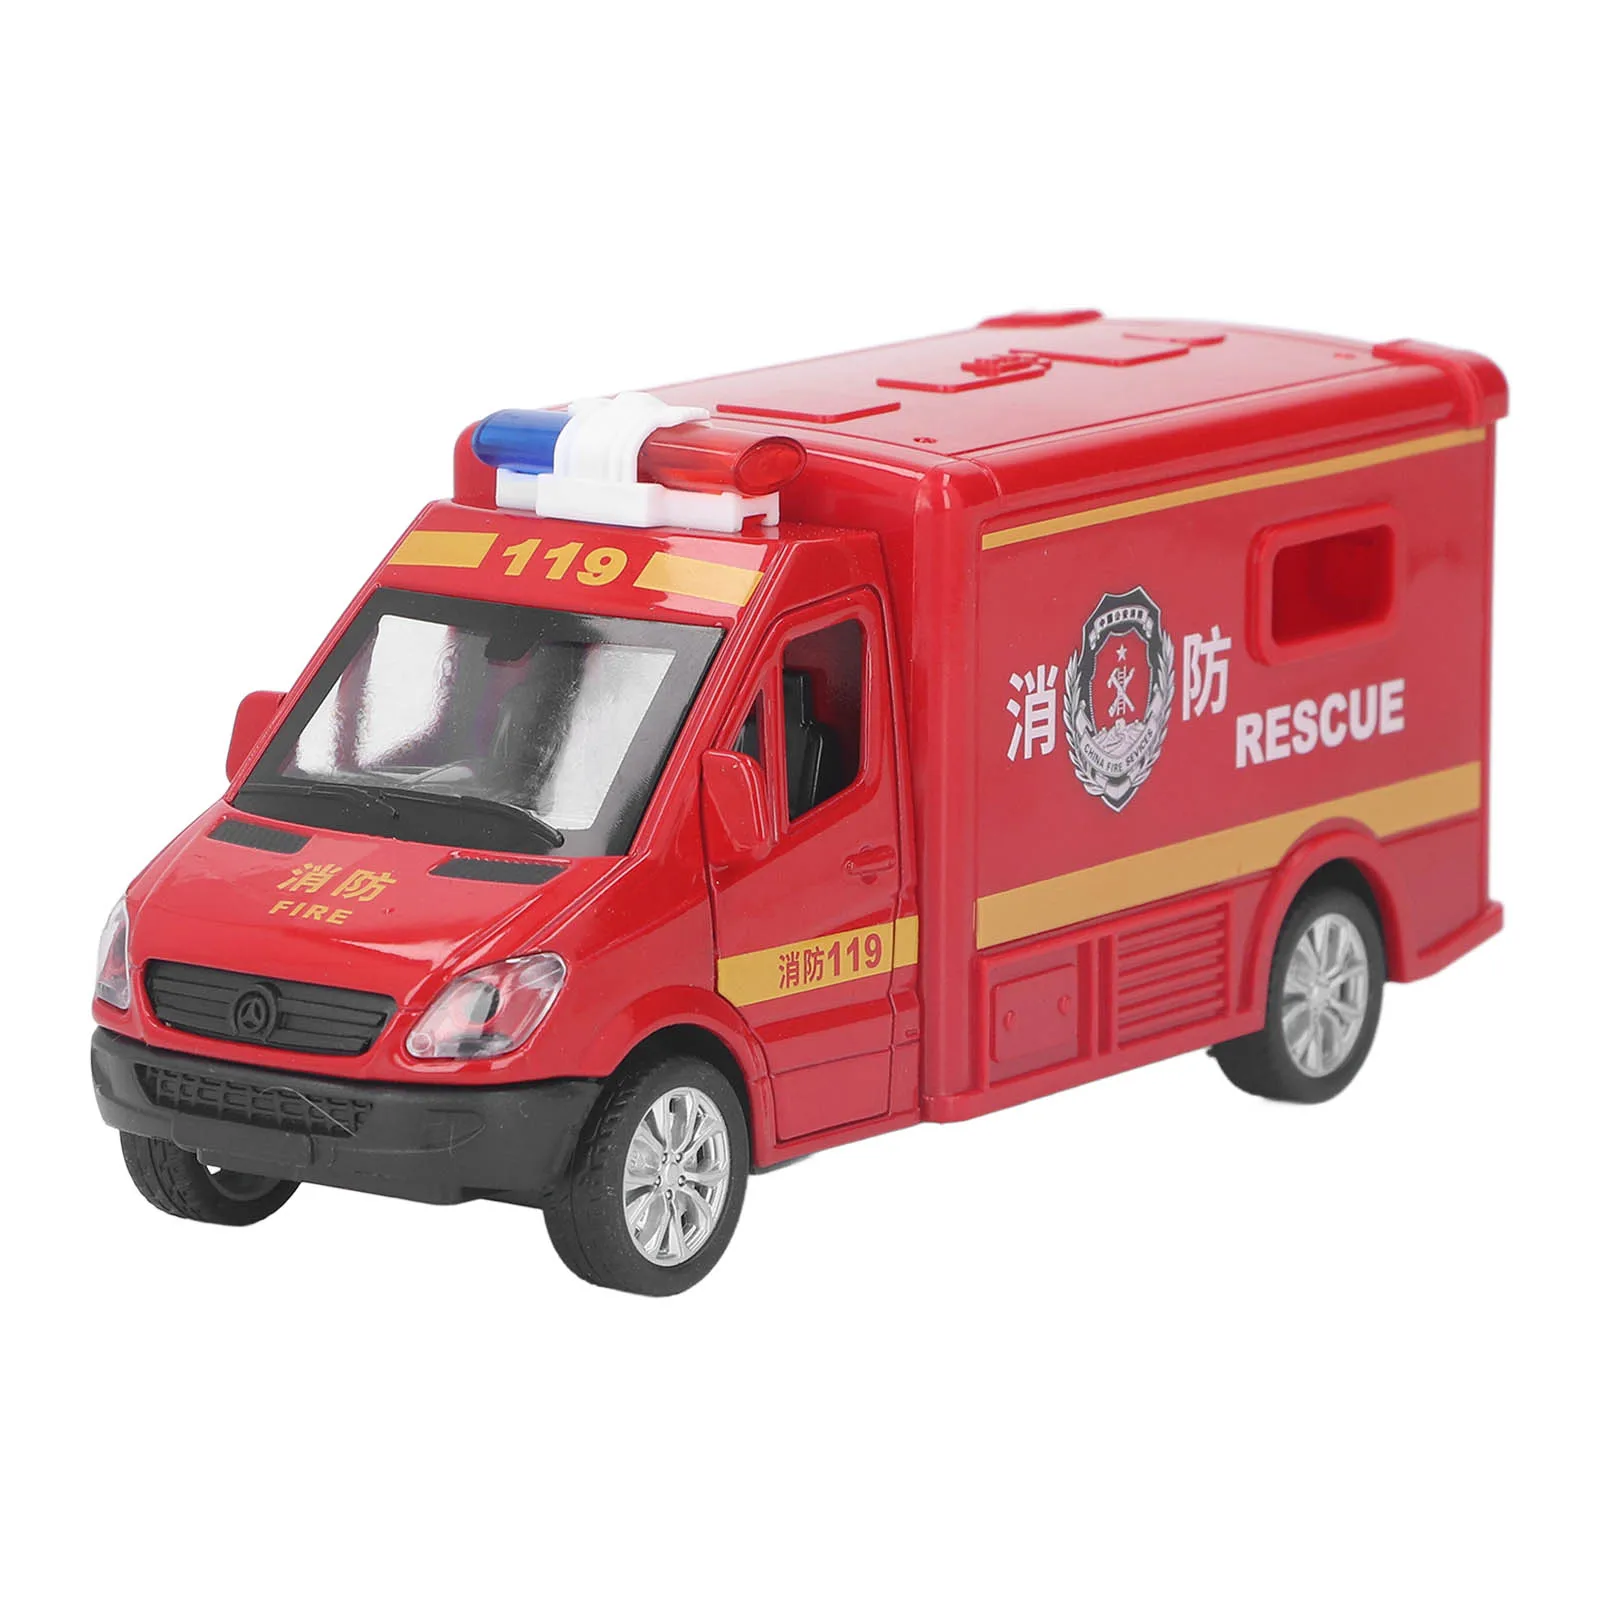 Fire Truck Alloy Simulation Car Model Innovative Sound and Lights Fire Truck Pull Back Fire Truck Toy for Kids Gifts Collection police fire pickups truck model 1 43 sound